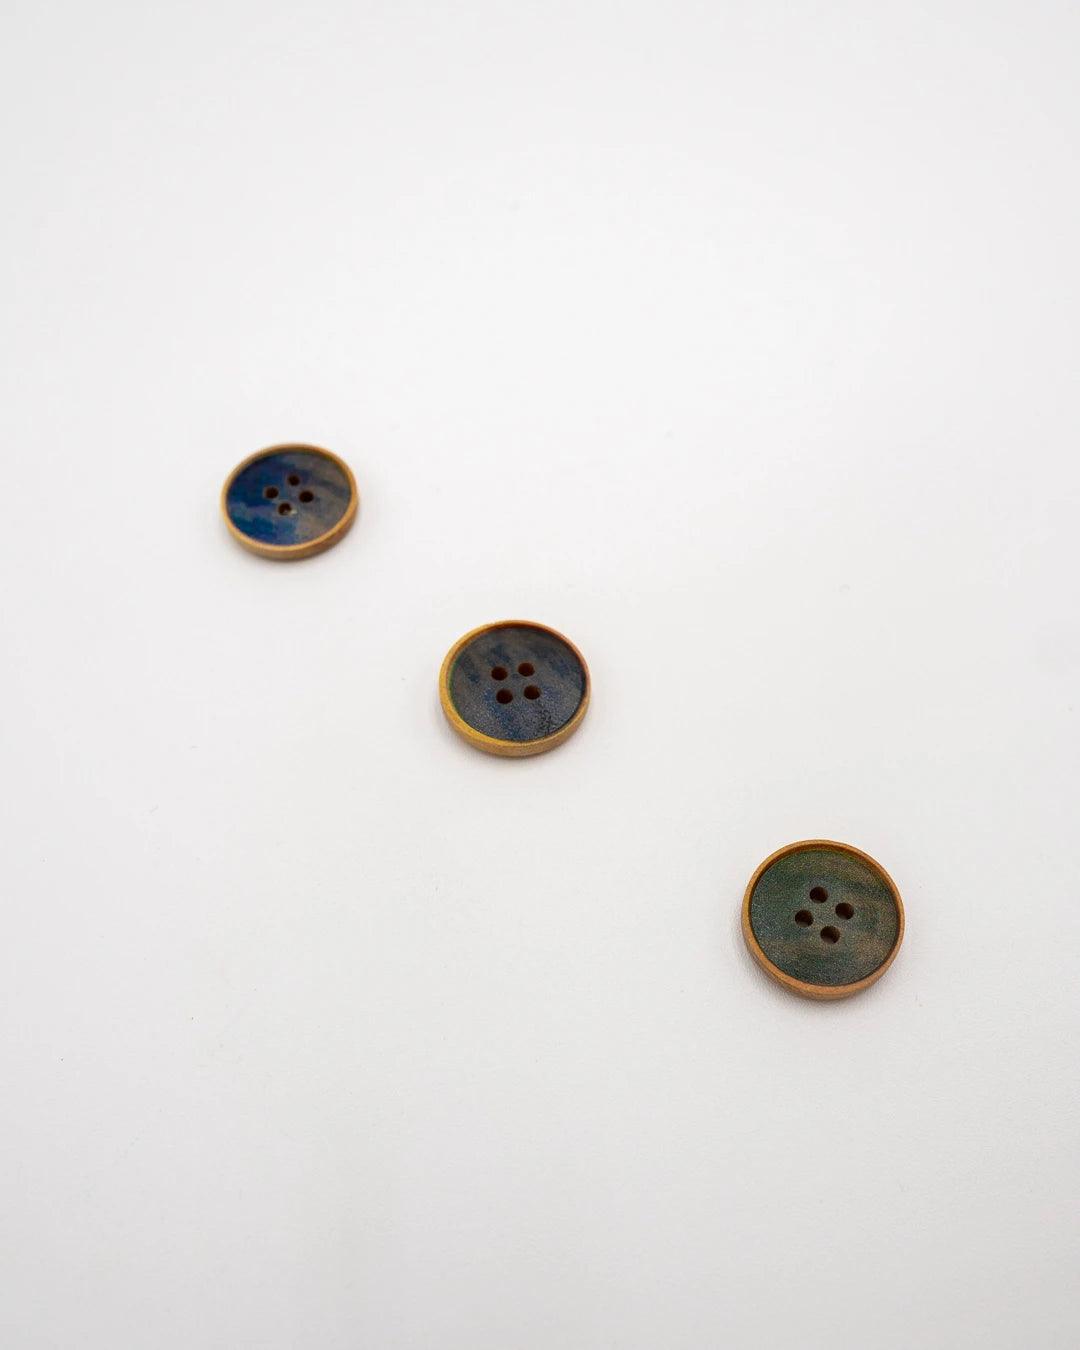 Streaky Wooden Buttons - 0.78" / 20 mm